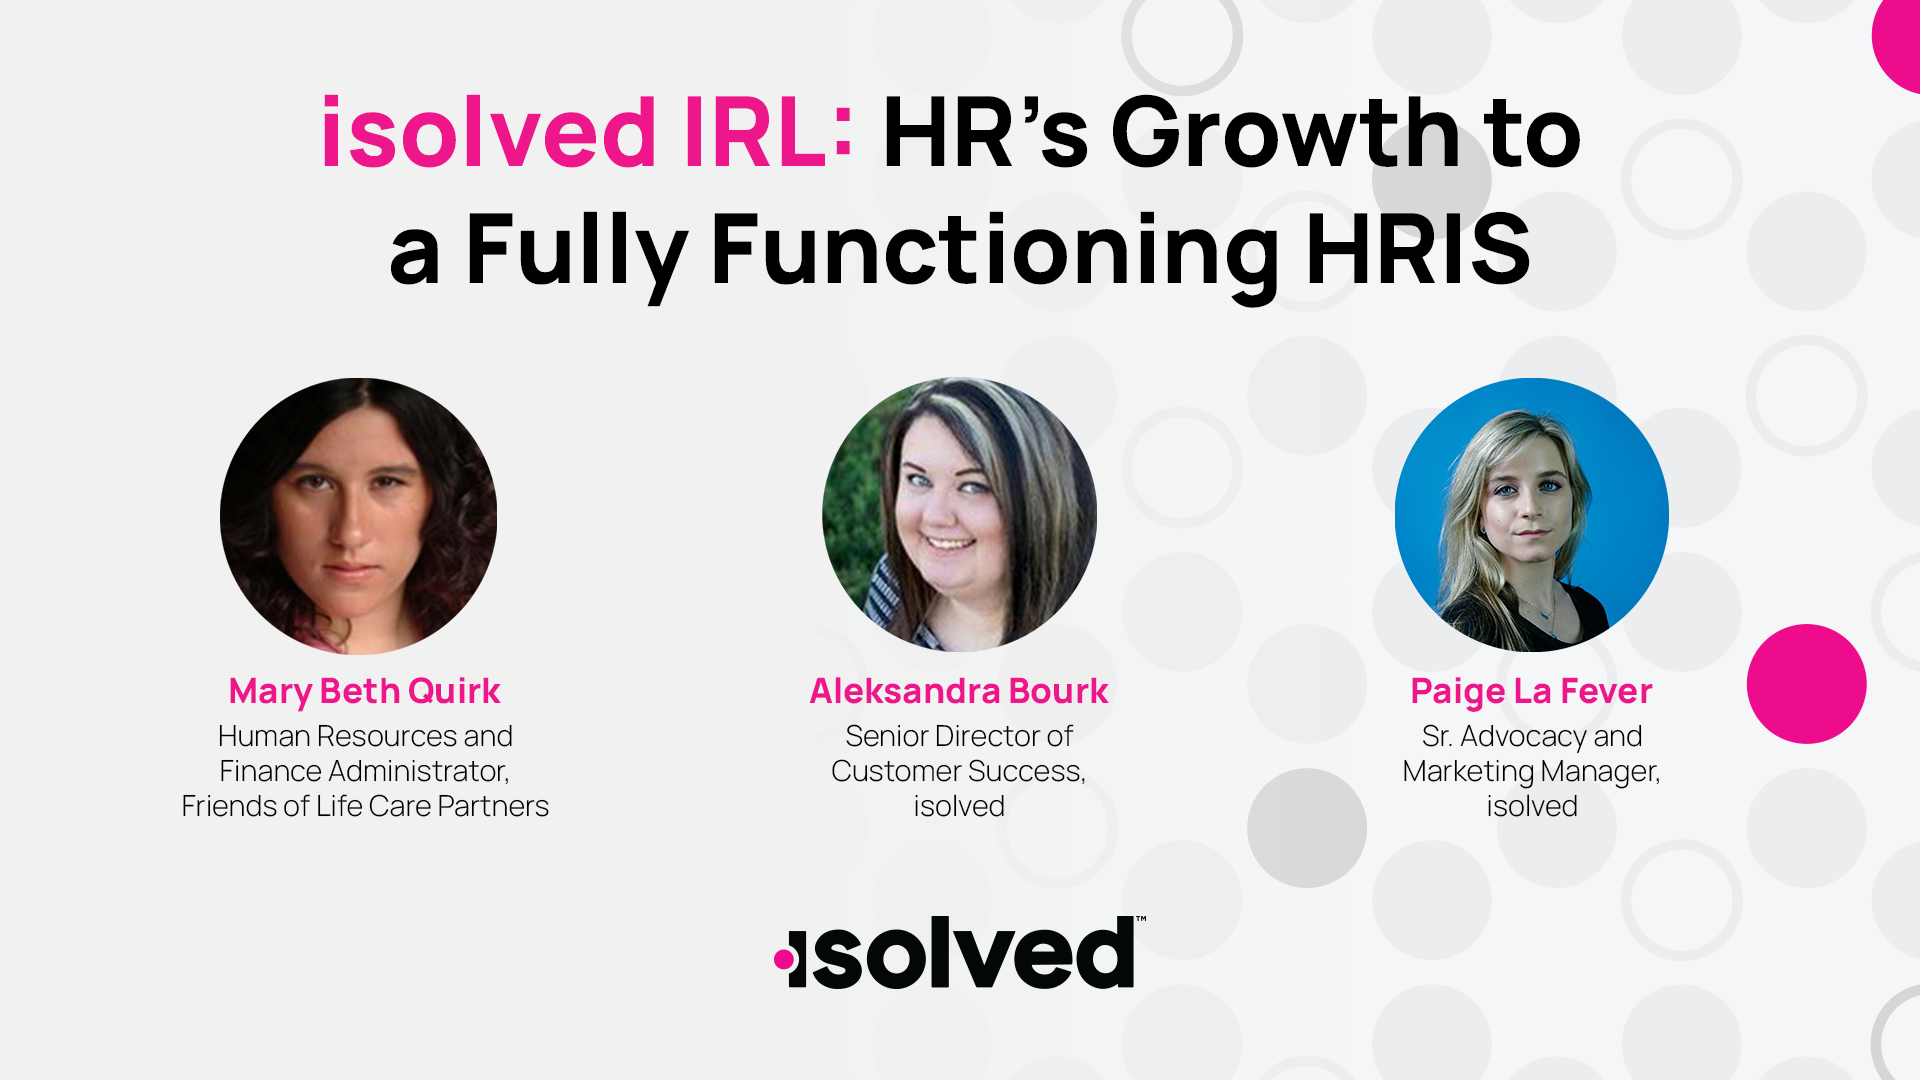 isolved IRL: HRs Growth to a Fully Functioning HRIS